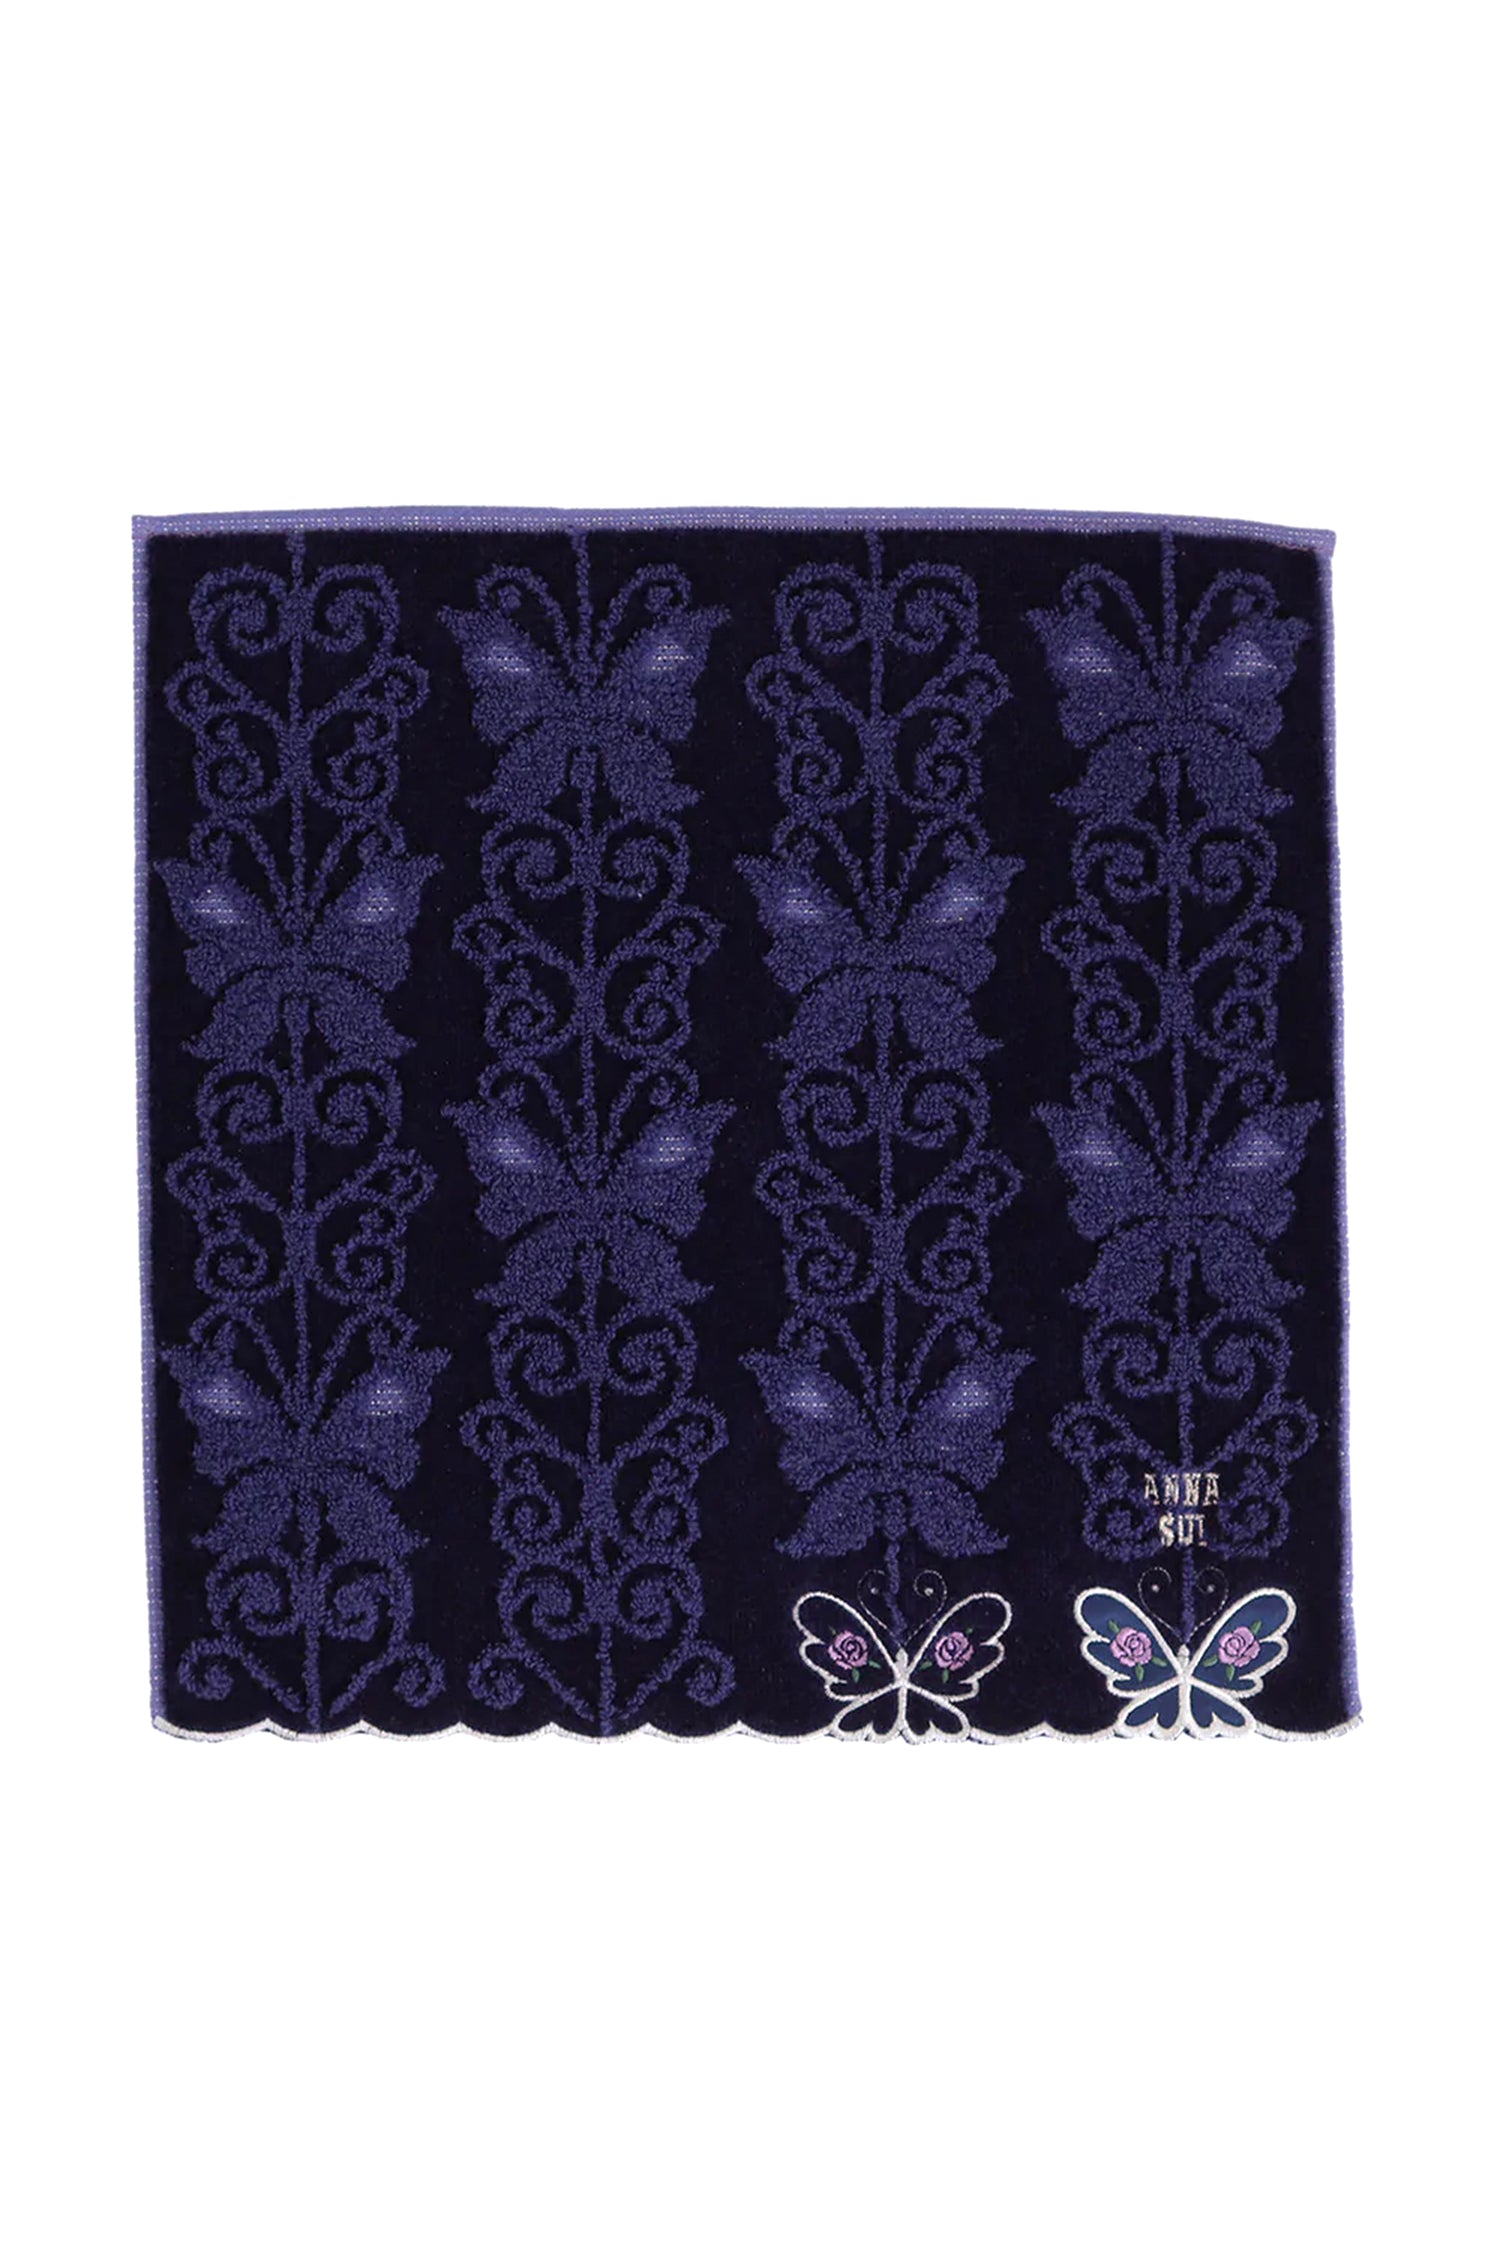 Butterfly Pattern Washcloth - Anna Sui